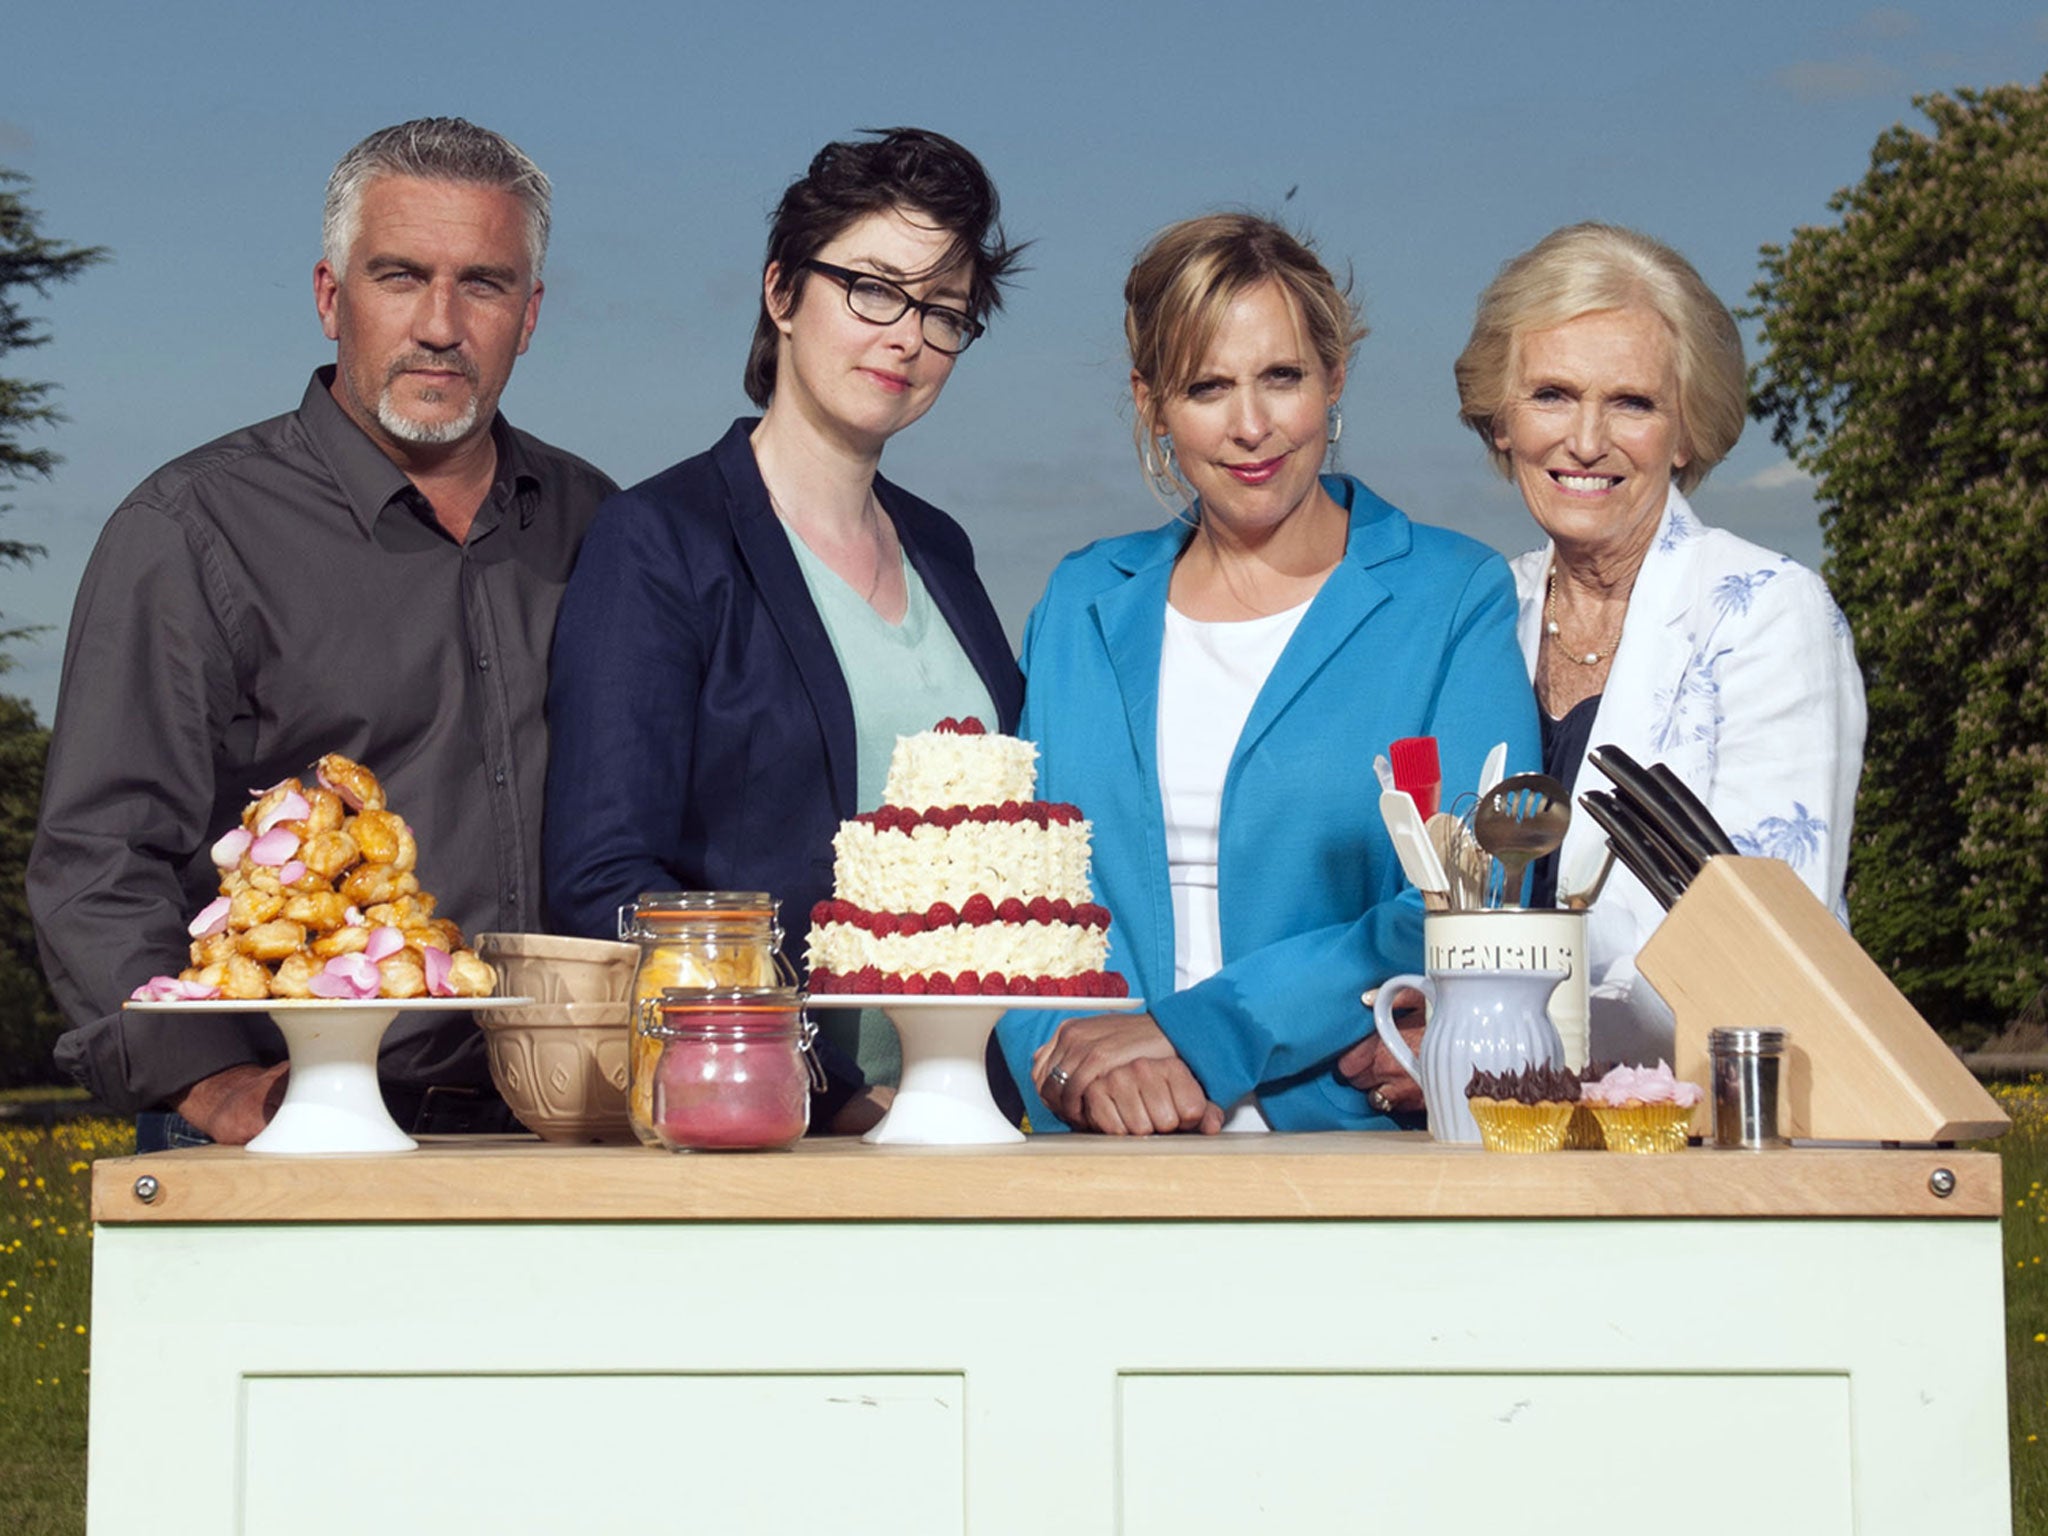 The Great British Bake Off Team are back